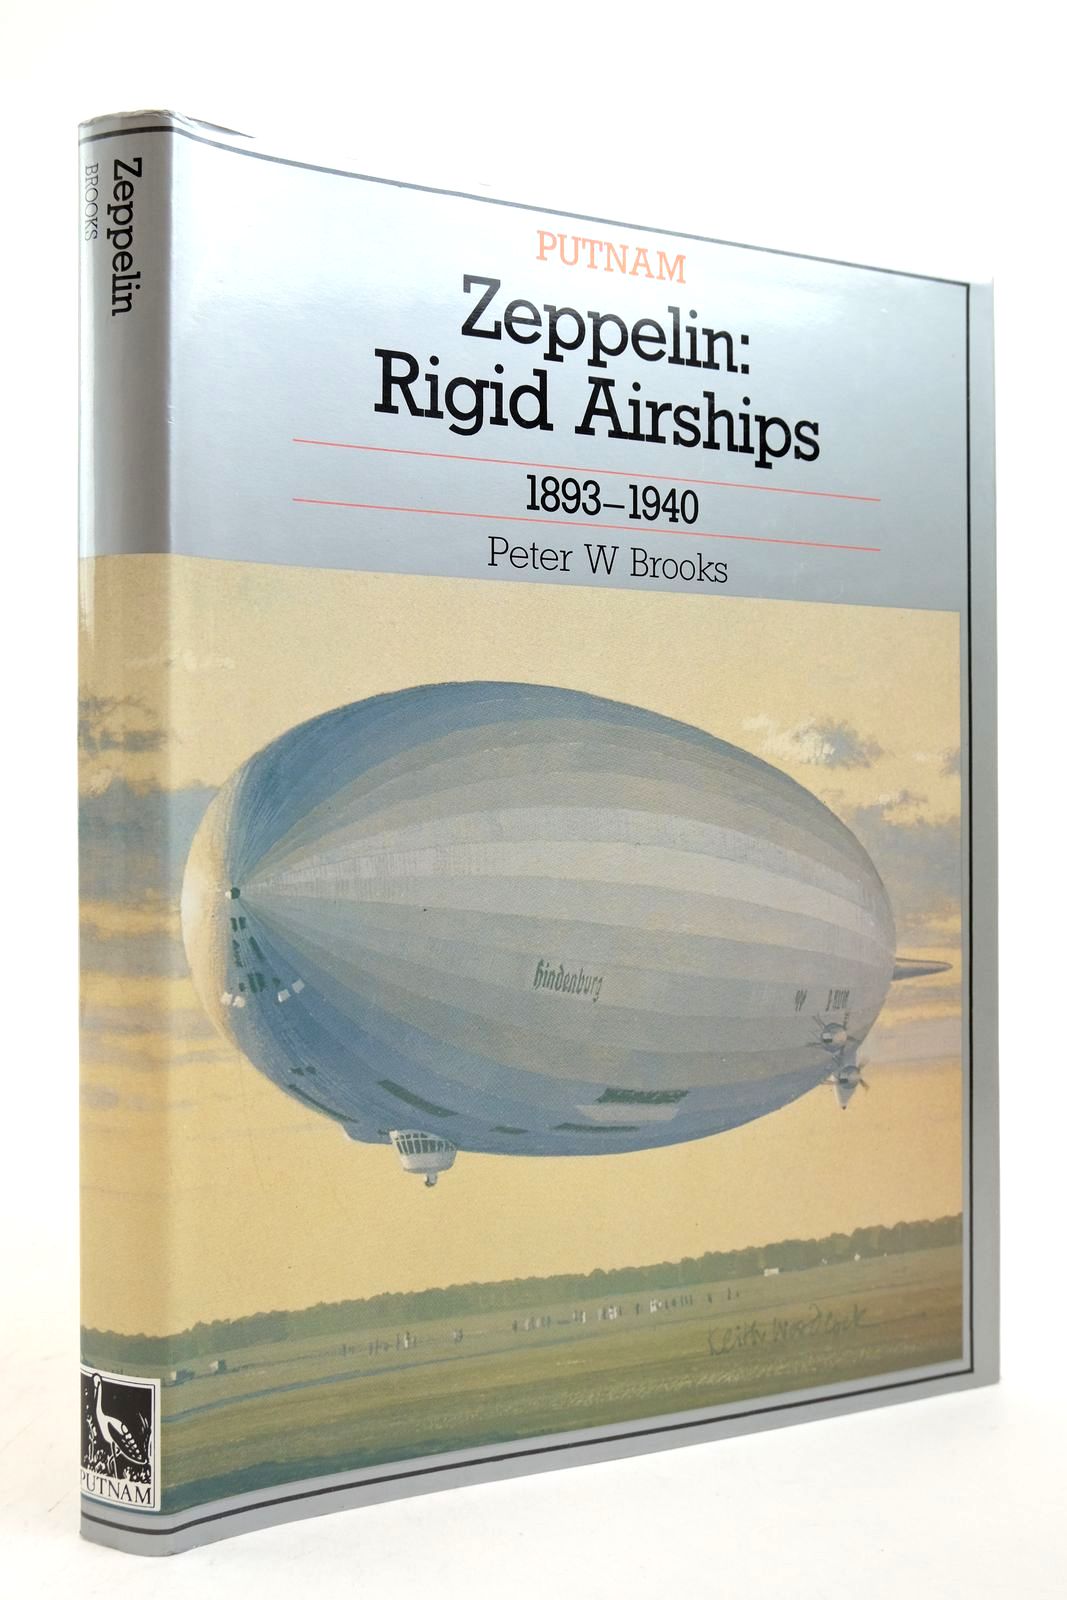 Photo of ZEPPELIN: RIGID AIRSHIPS 1893-1940 written by Brooks, Peter W. published by Putnam (STOCK CODE: 2139194)  for sale by Stella & Rose's Books